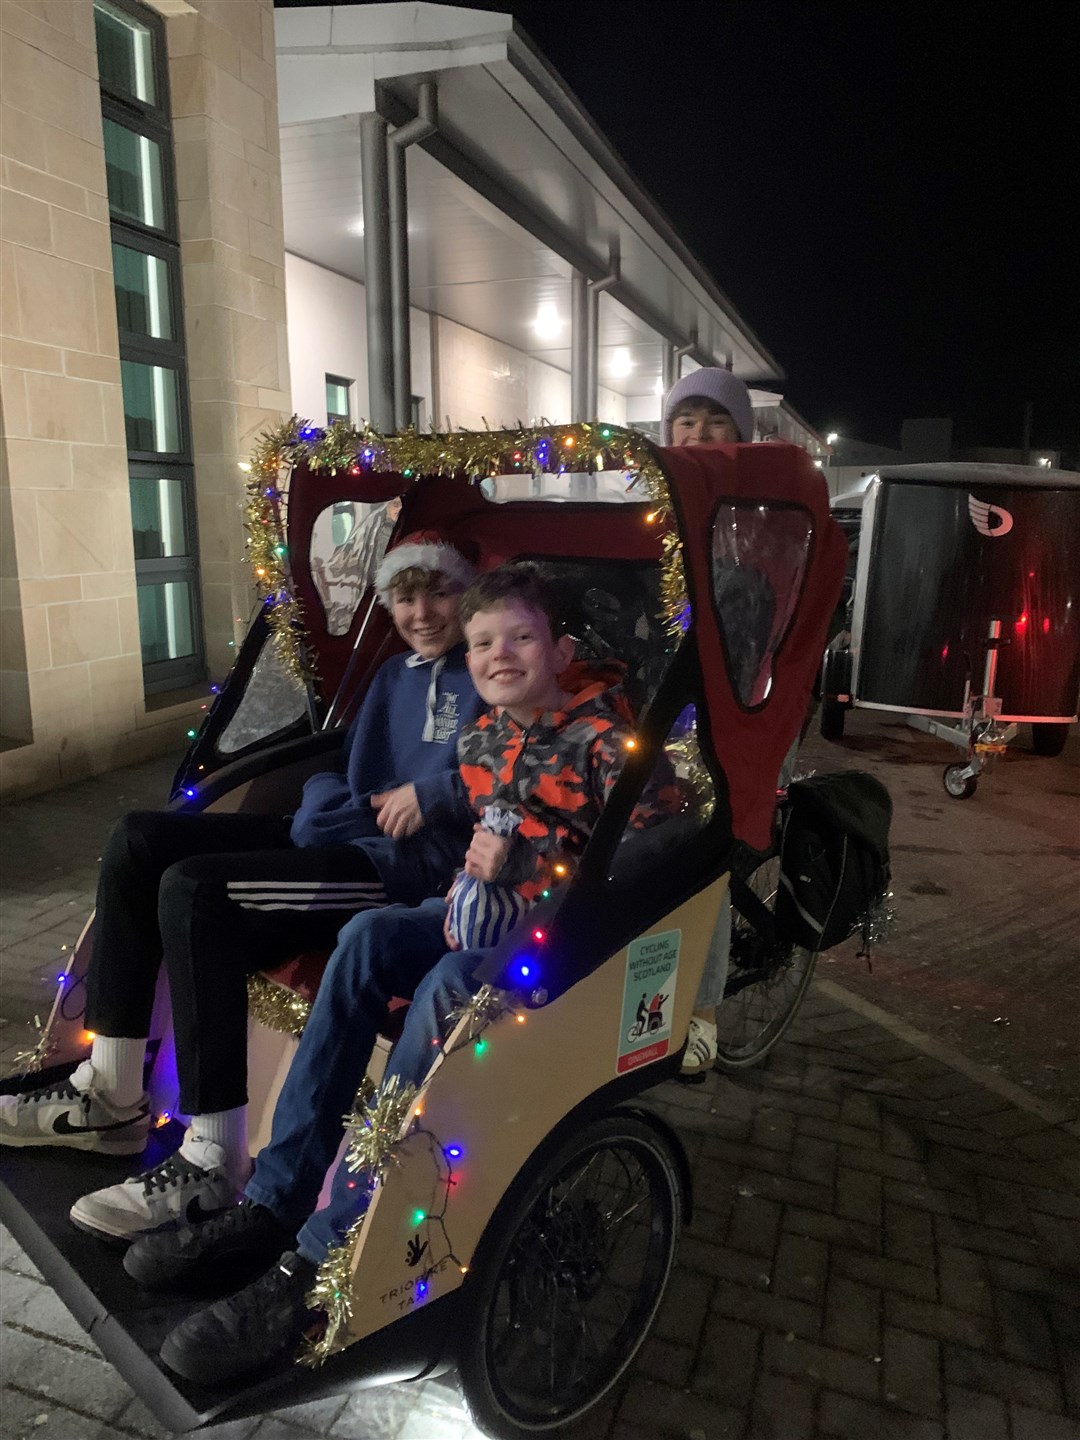 Senior pupils got involved in offering 'sleigh' rides outside - on the community trishaw.